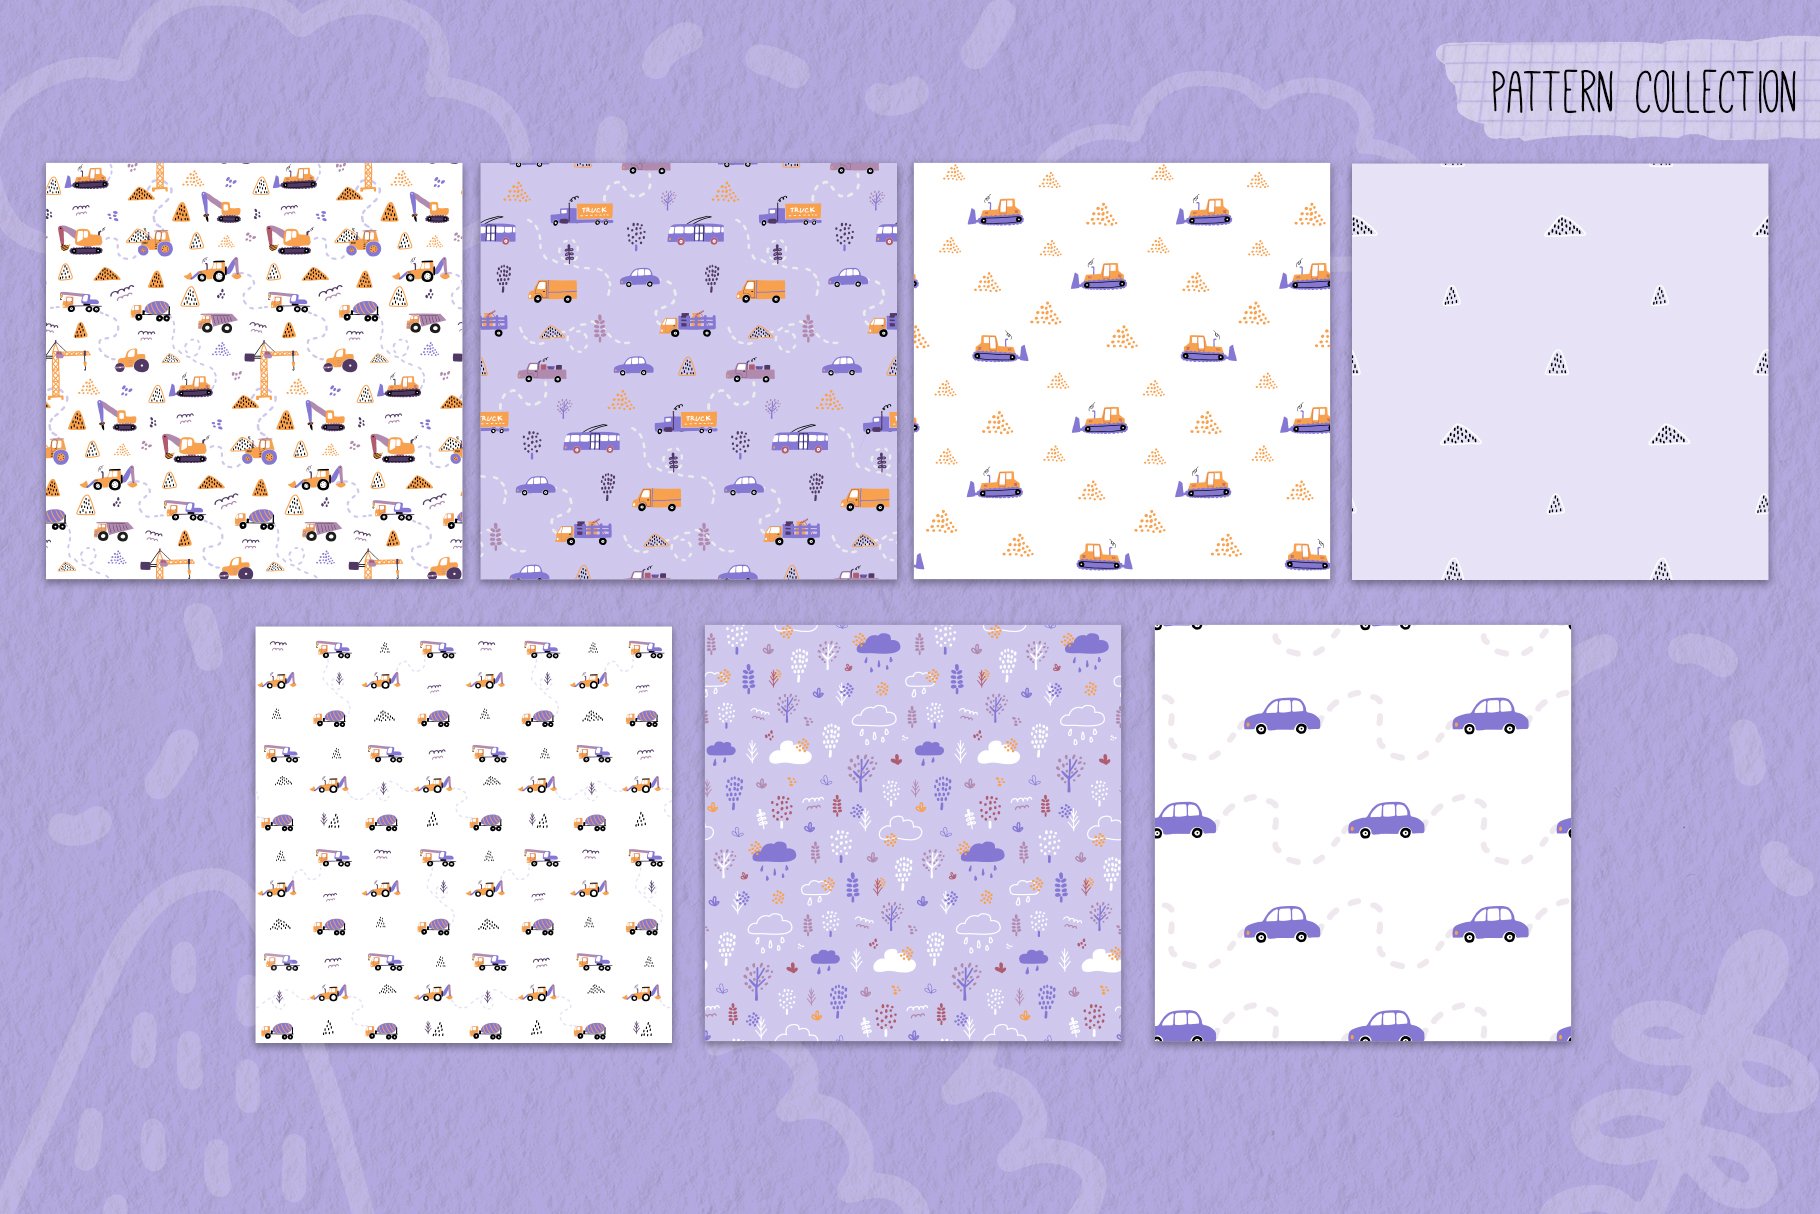 Cool lilac patterns for different purposes.